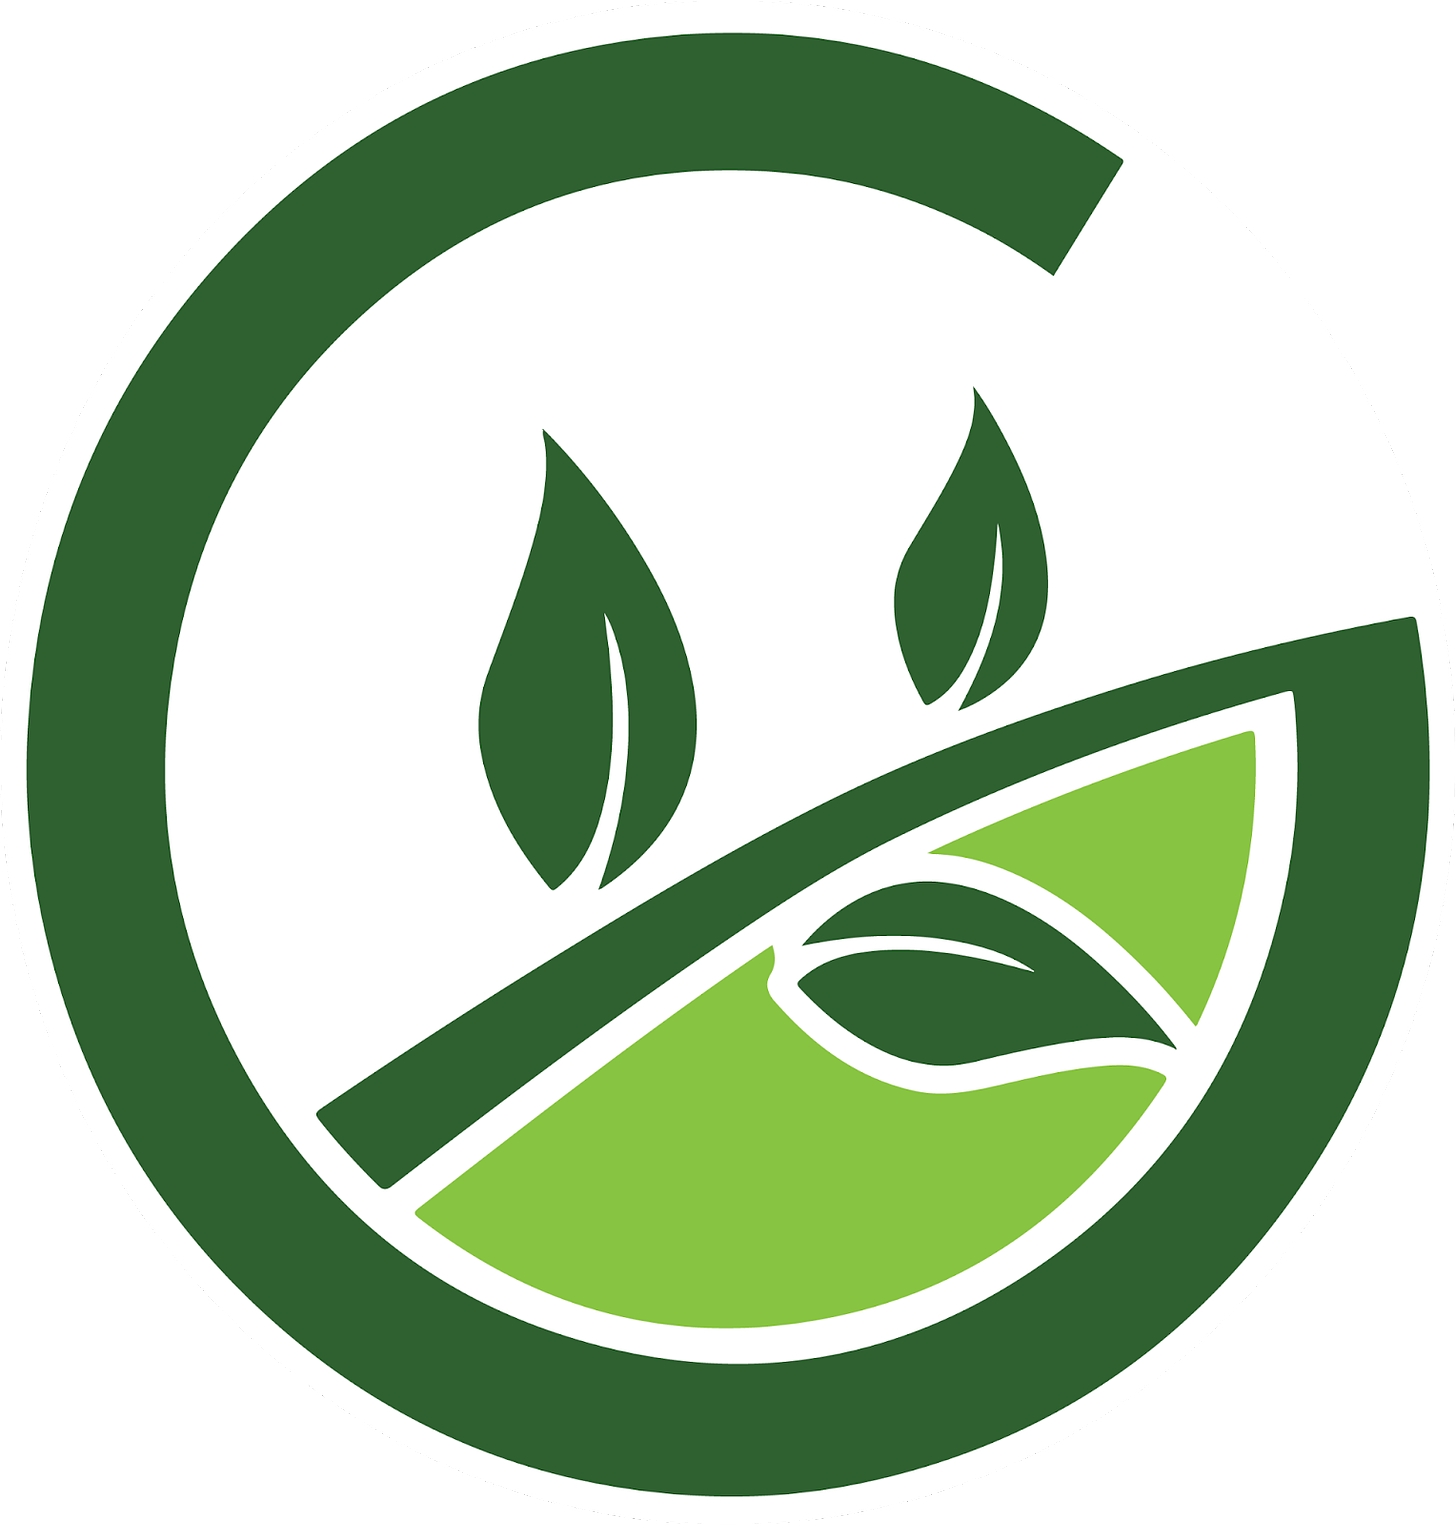 Good Agriculture's logo which is a stylized G with green, leafy accents